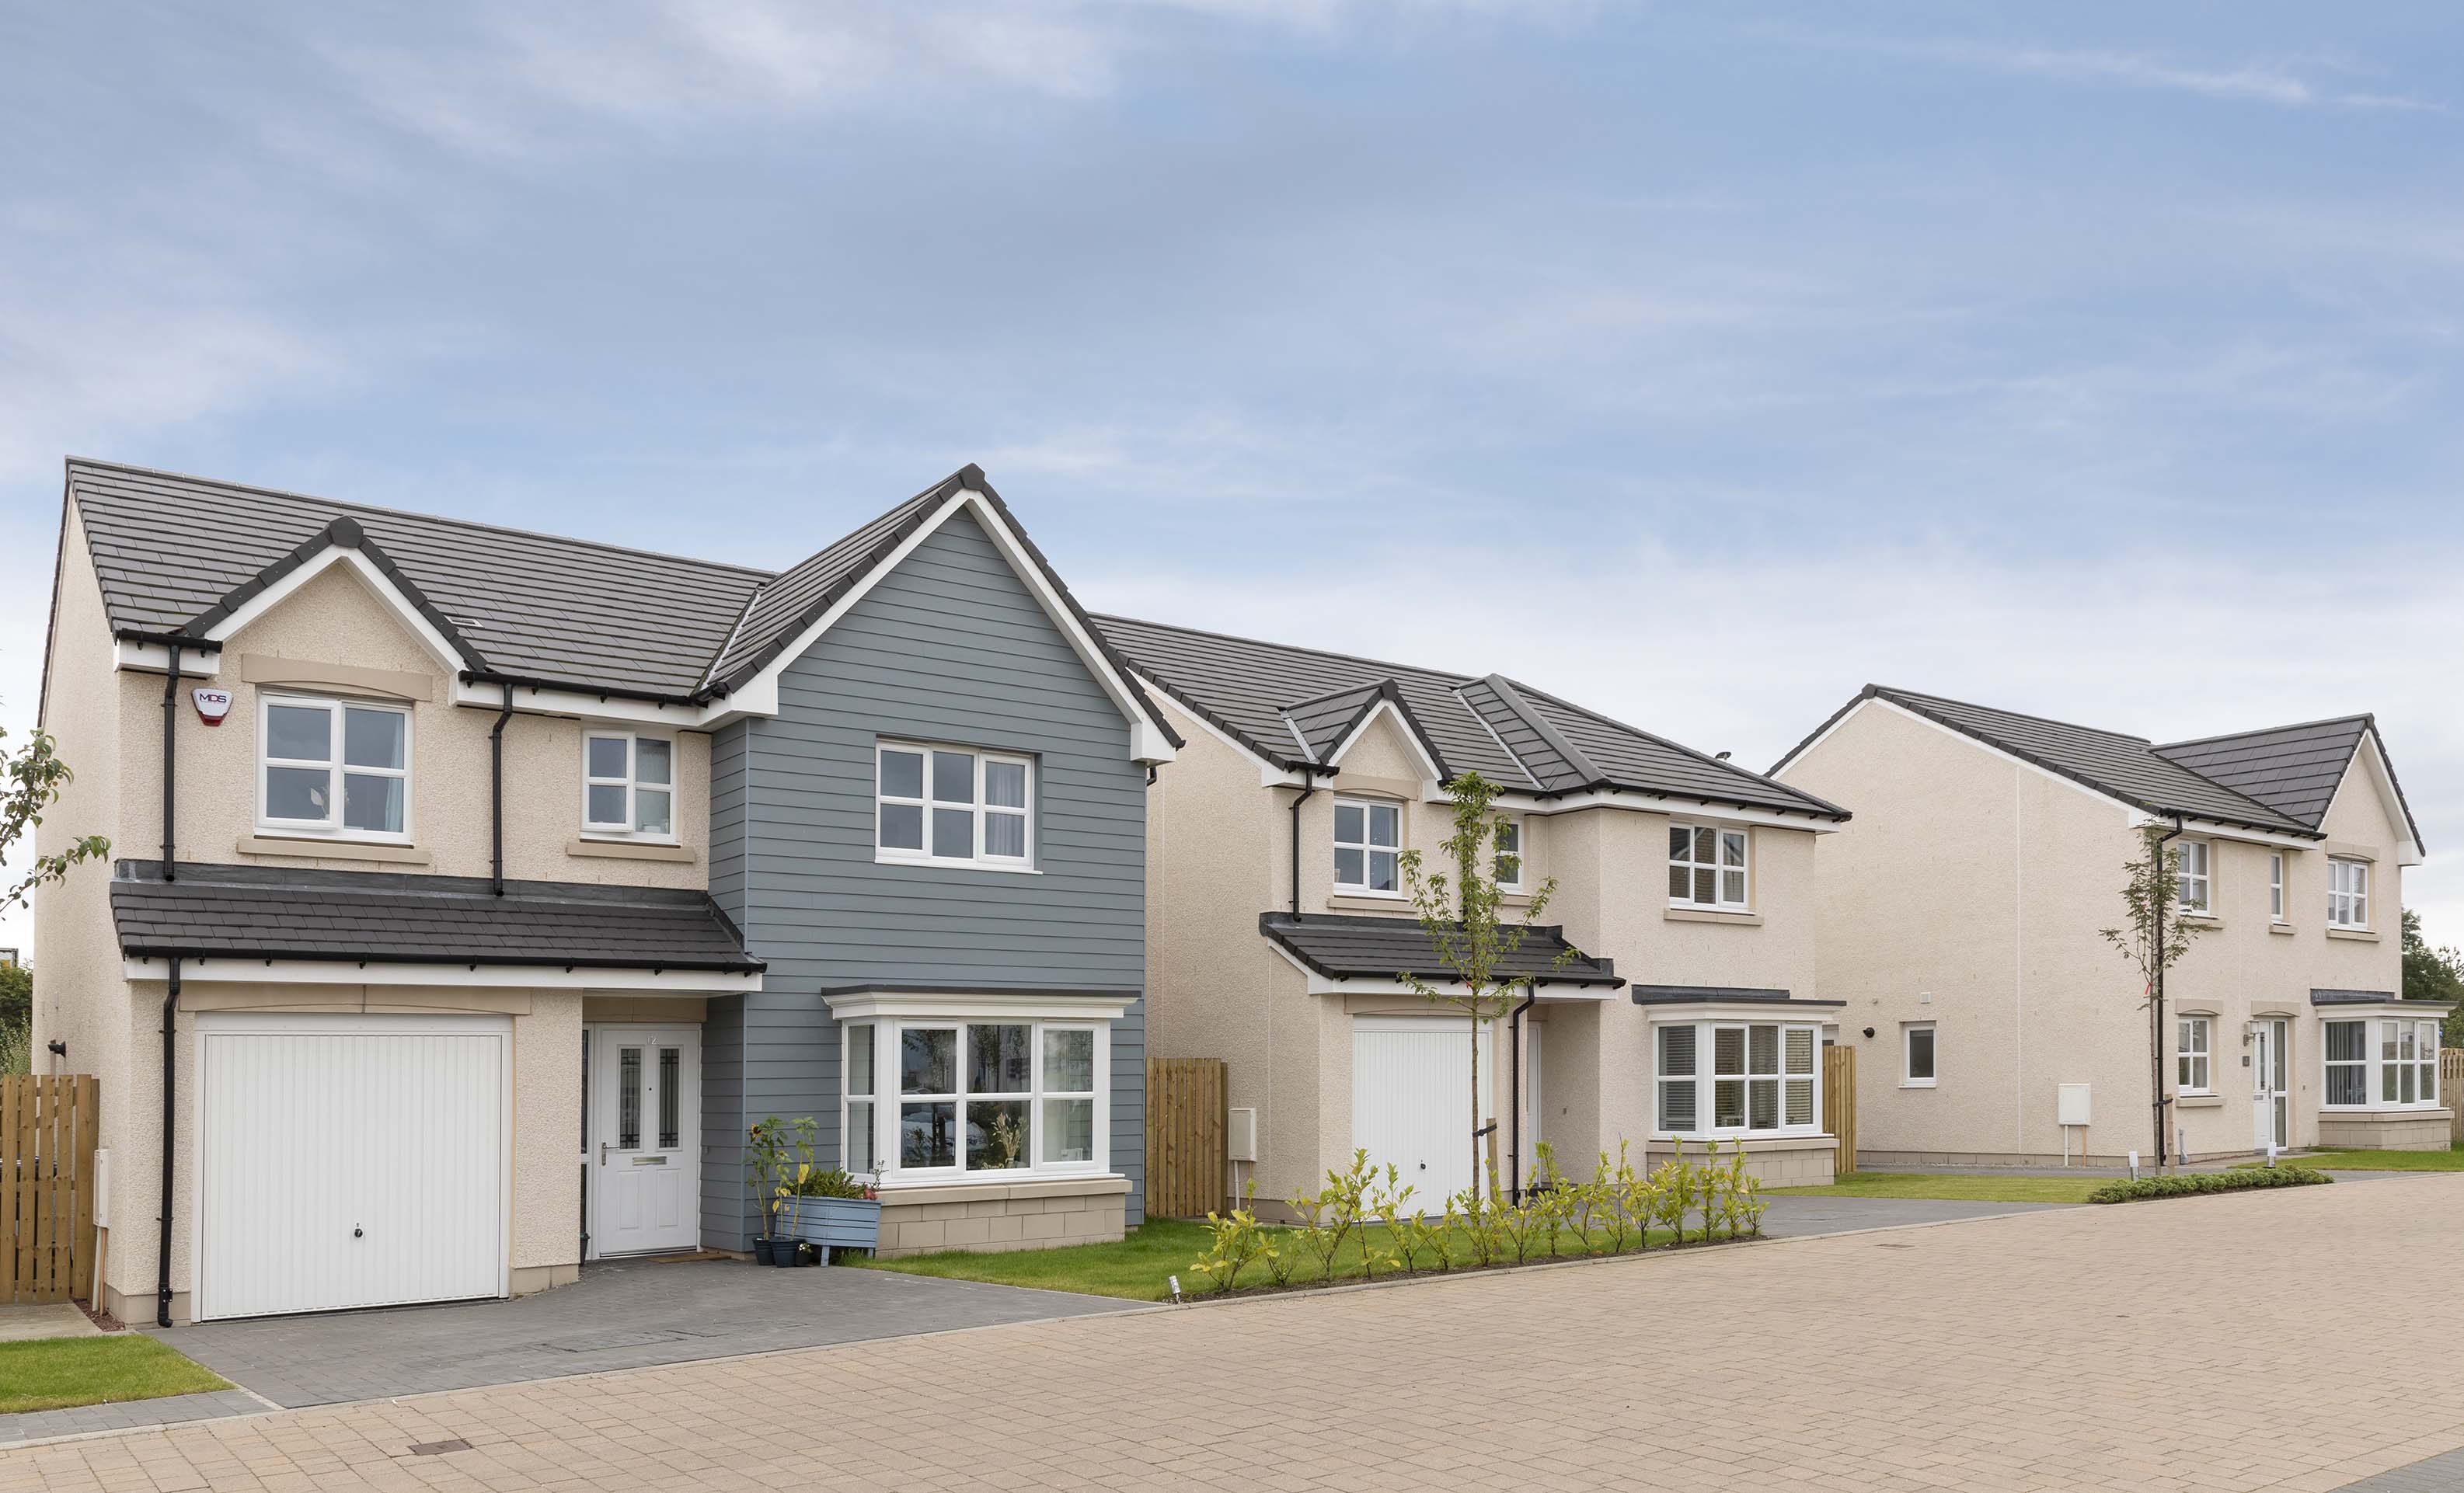 Proposals by Miller Homes for Kinross set to go out for consultation